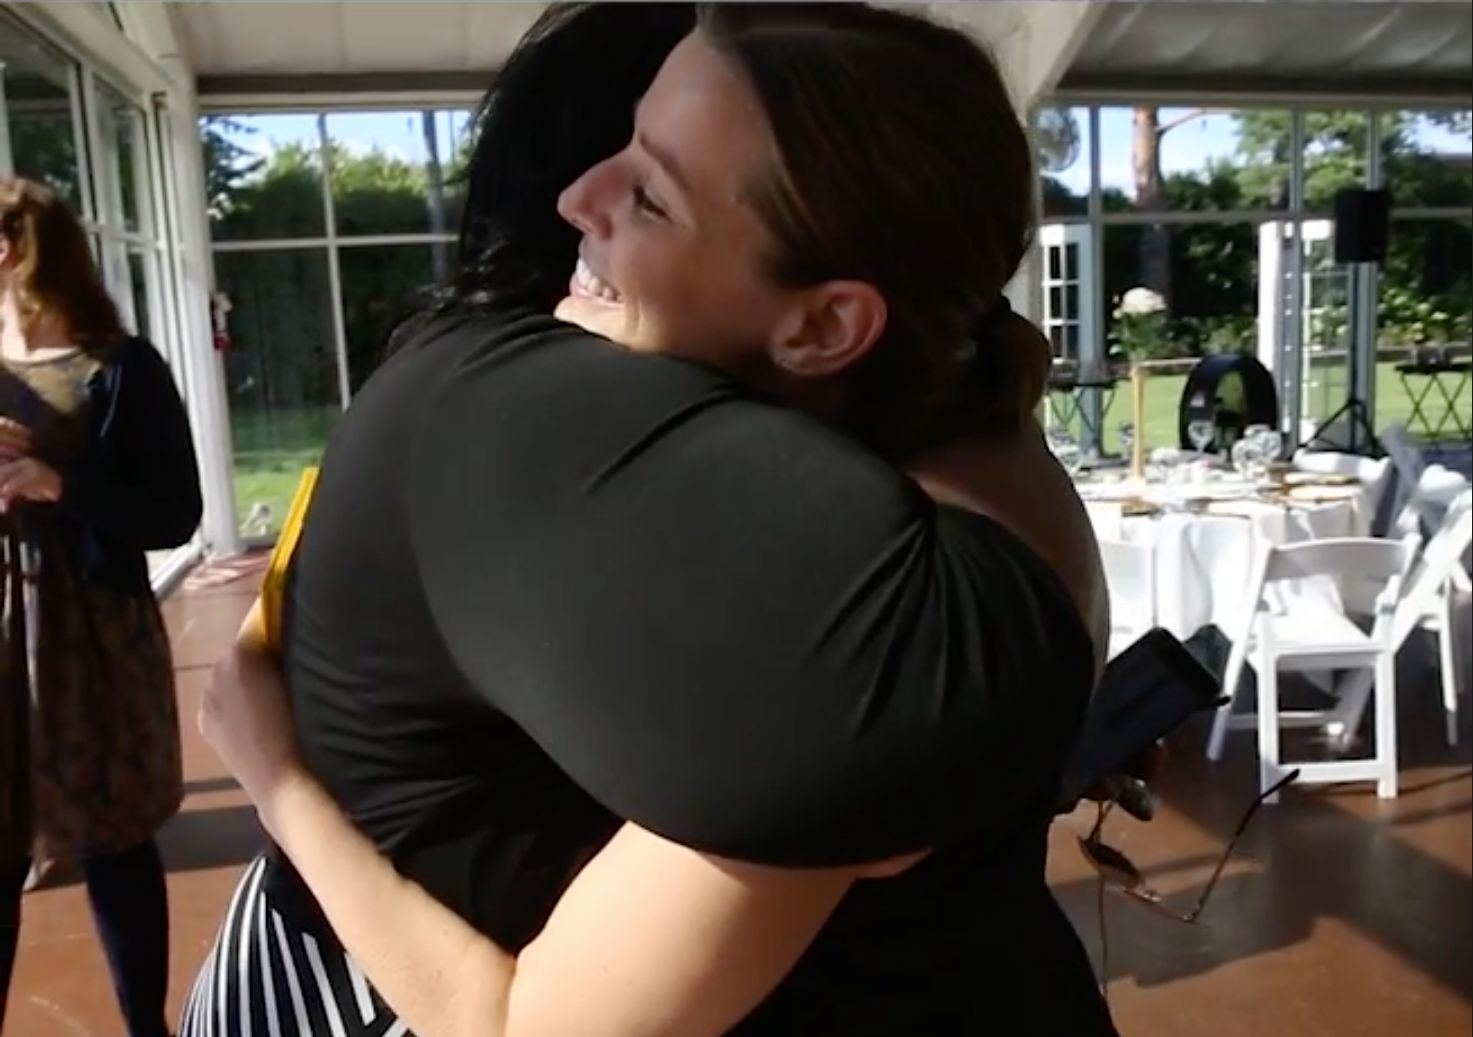 Bride-to-be calls off wedding, throws party for homeless